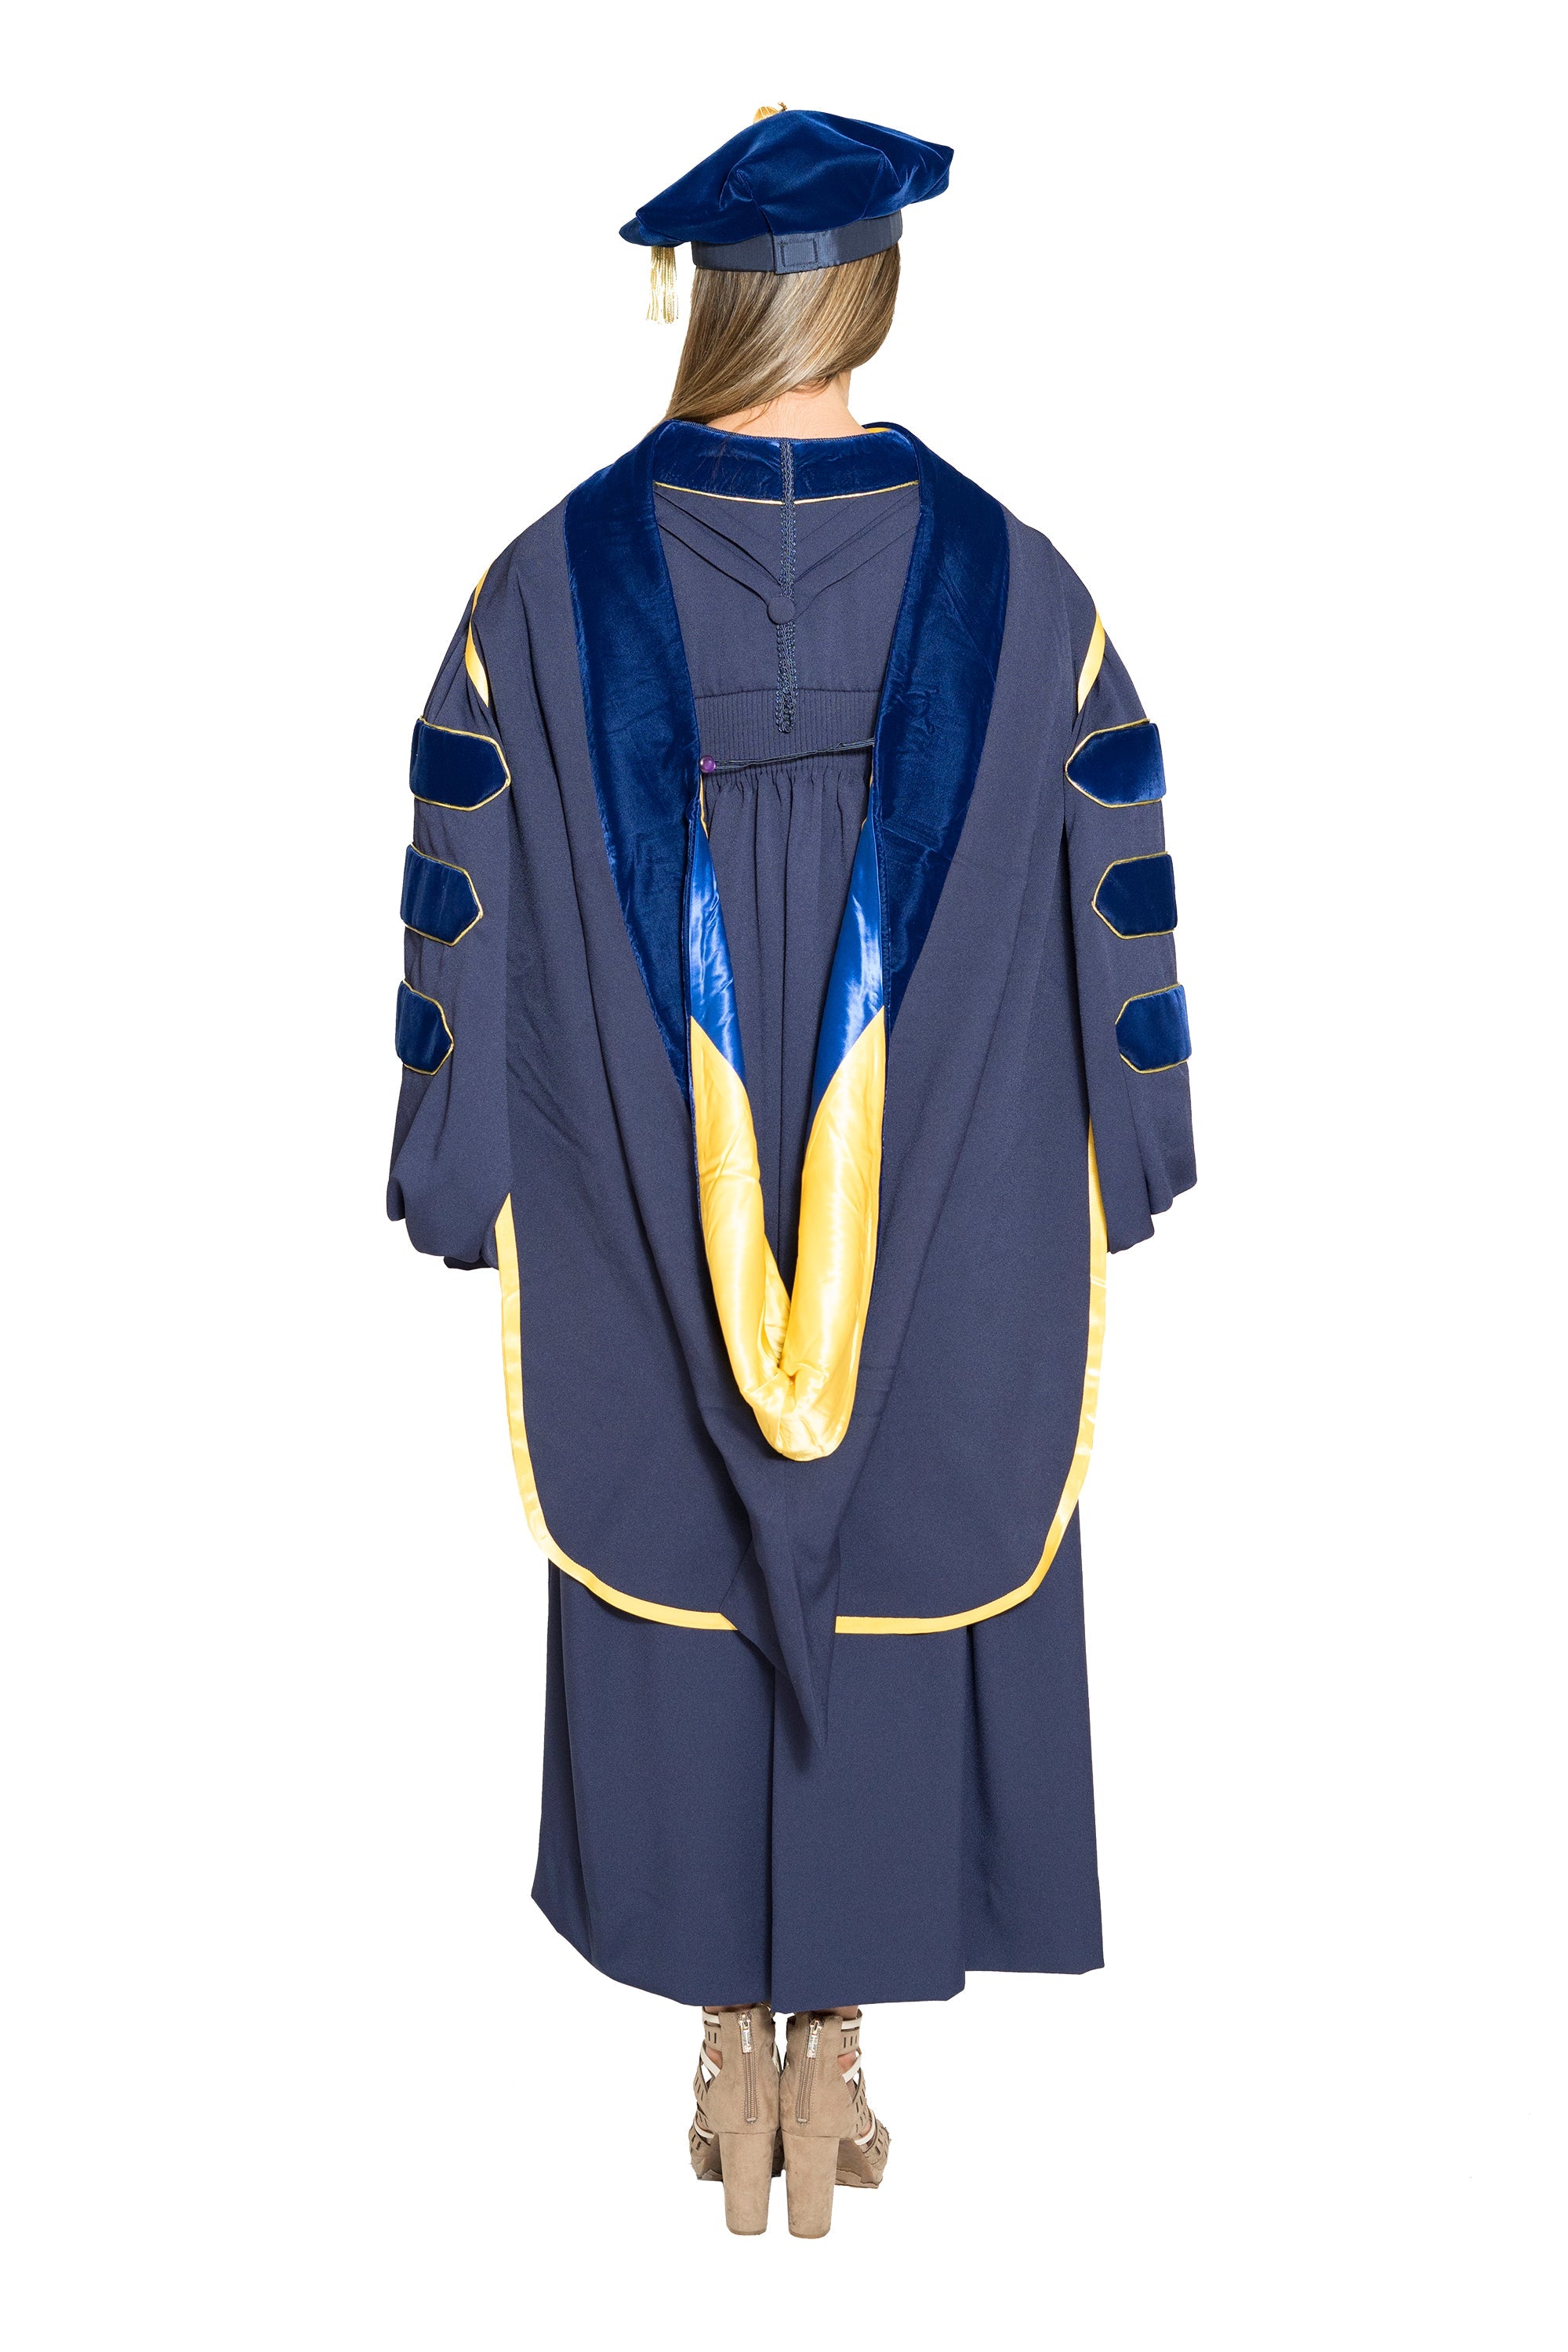 Doctorate Gown - Doctoral Degree - Browse by Academic Qualification -  Purchase Graduation Regalia - Out 'n About Graduation Regalia